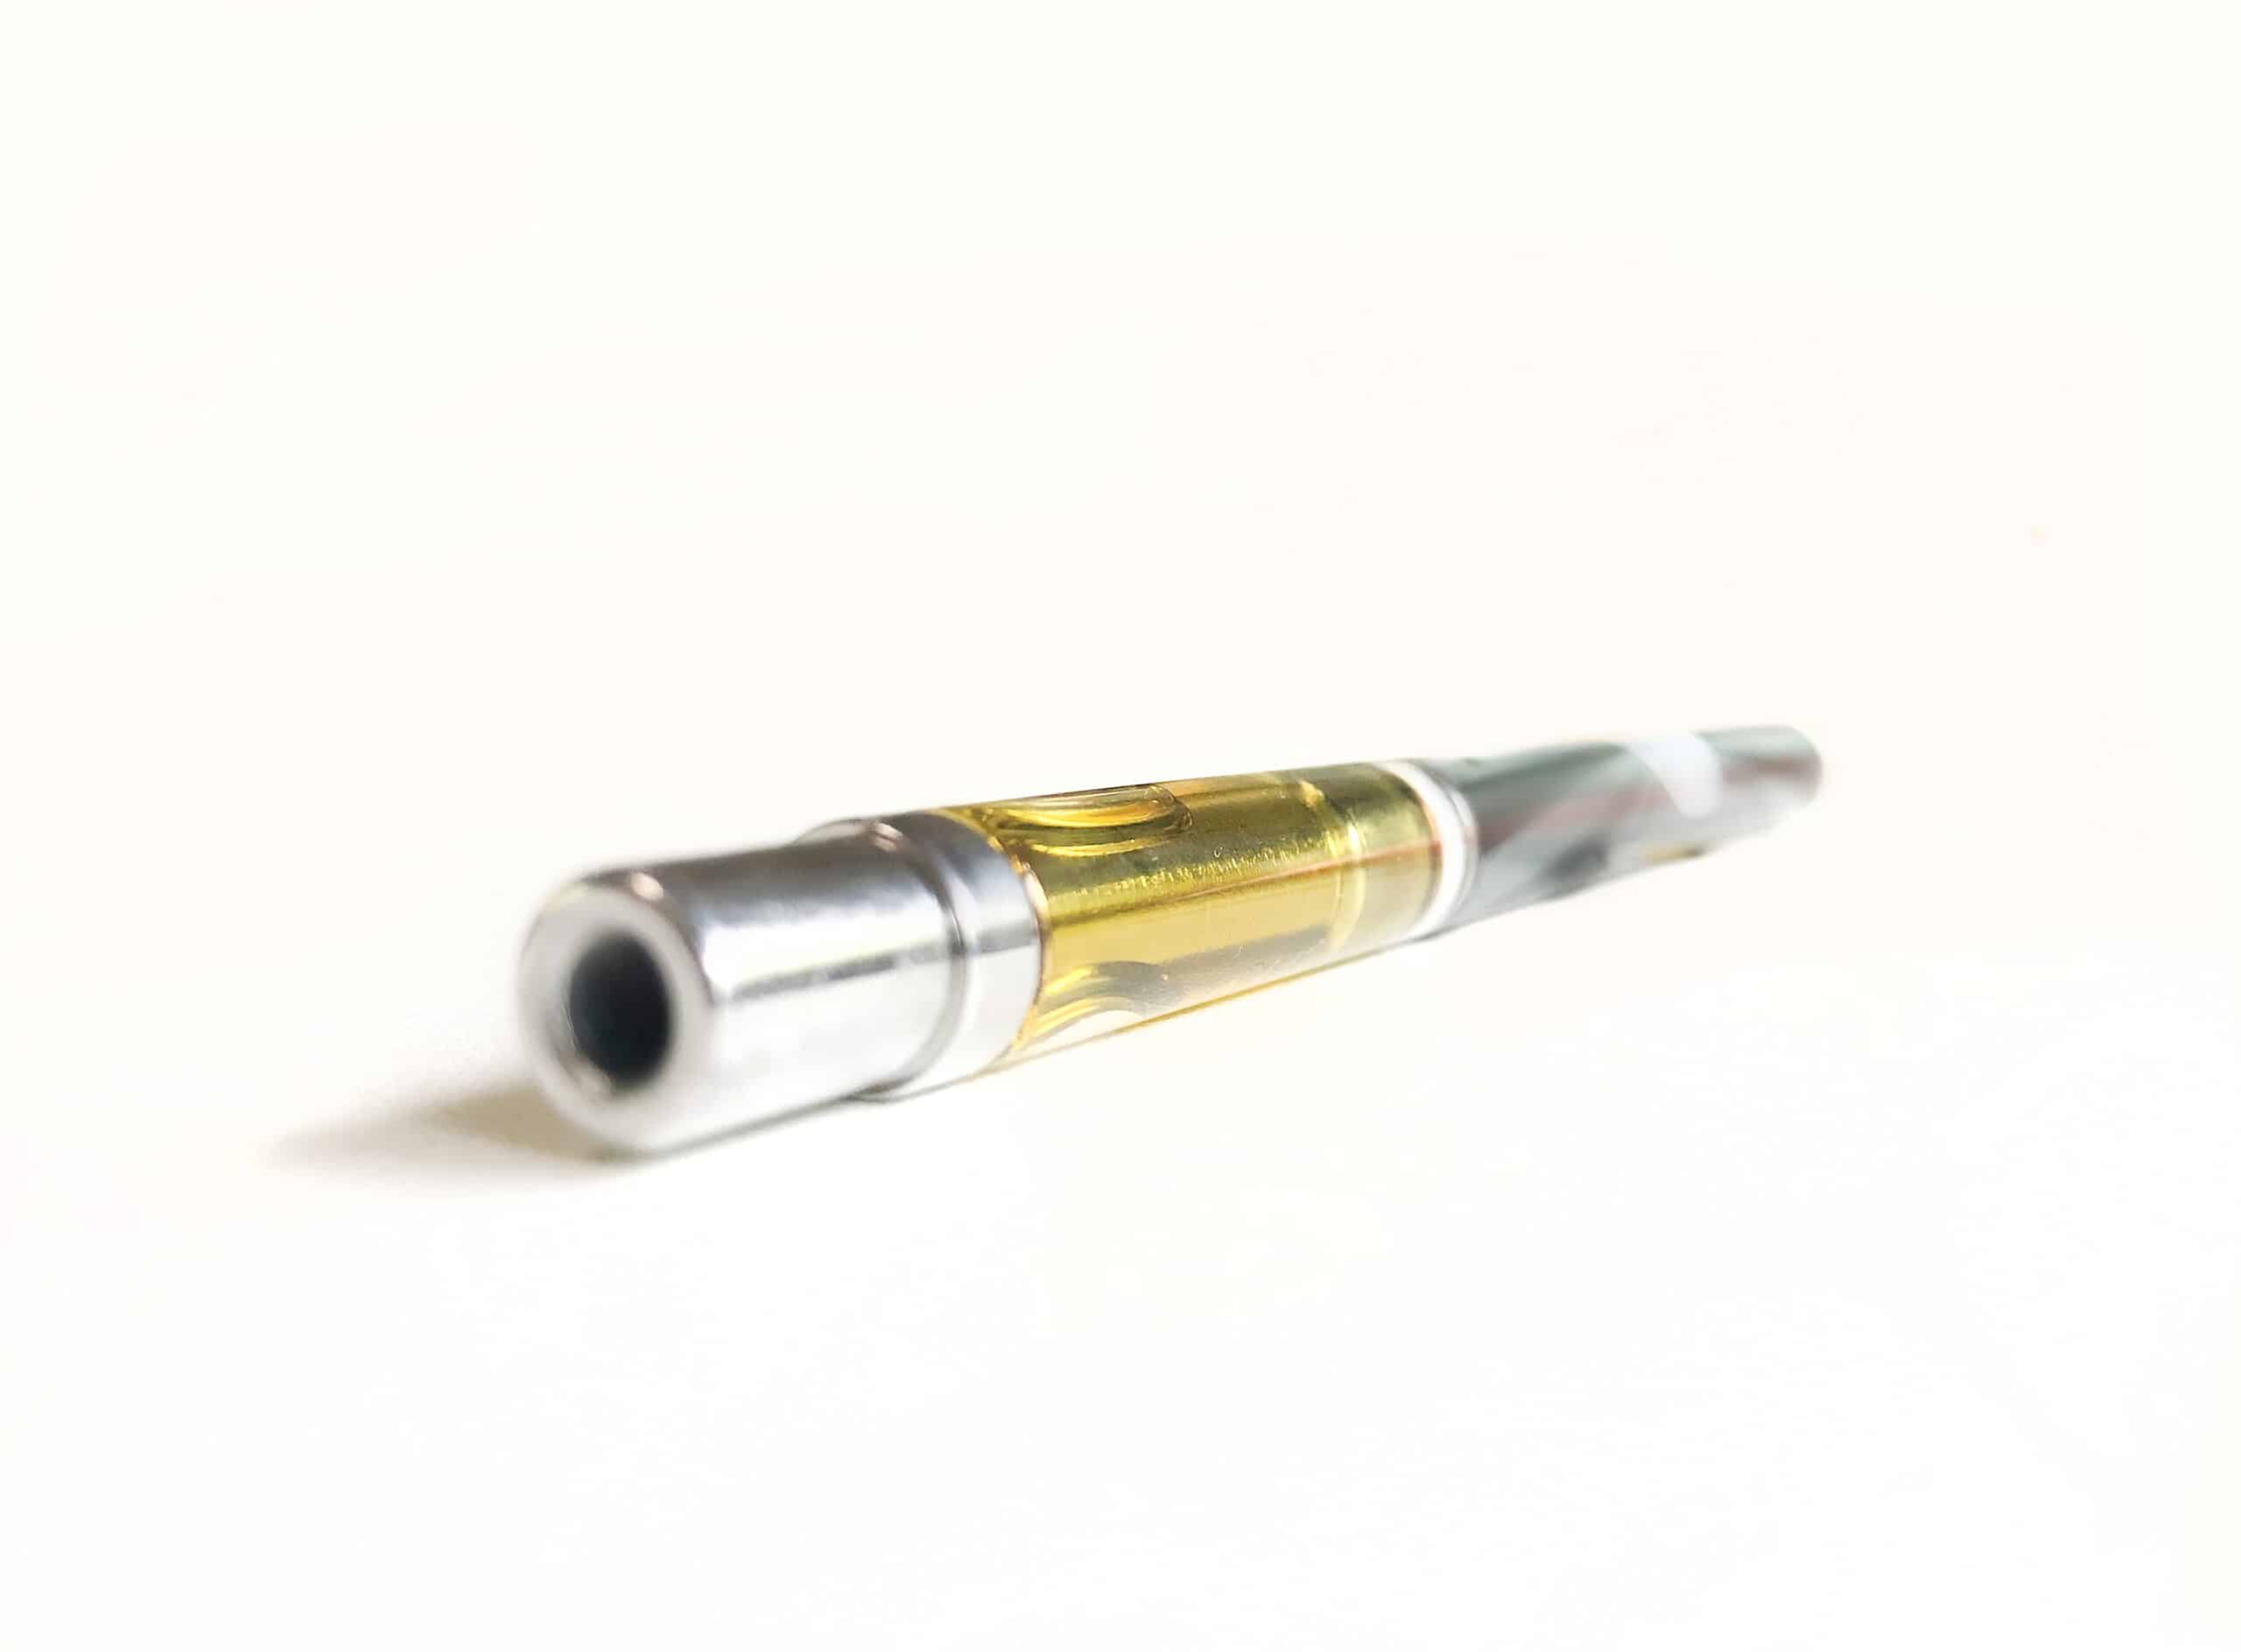 Shop The Best Vaporizers in New England